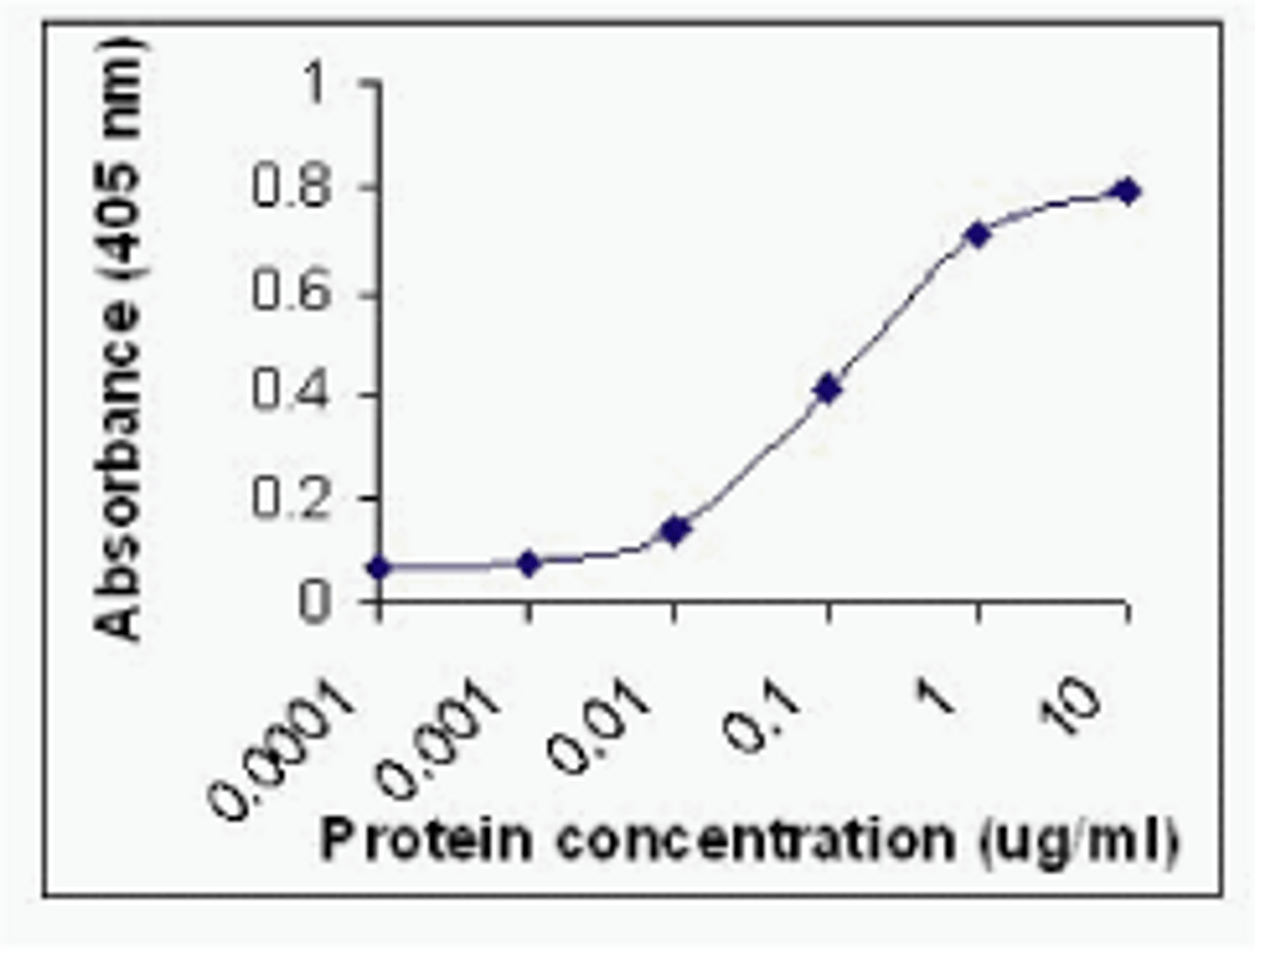 Direct ELISA test (x axis: protein concentration in ug/ml; y axis: absorbance at 405 nm) . Human plasma C3 protein was used as test antigen with XW-7061 at a concentration of 0.1 ug/ml.